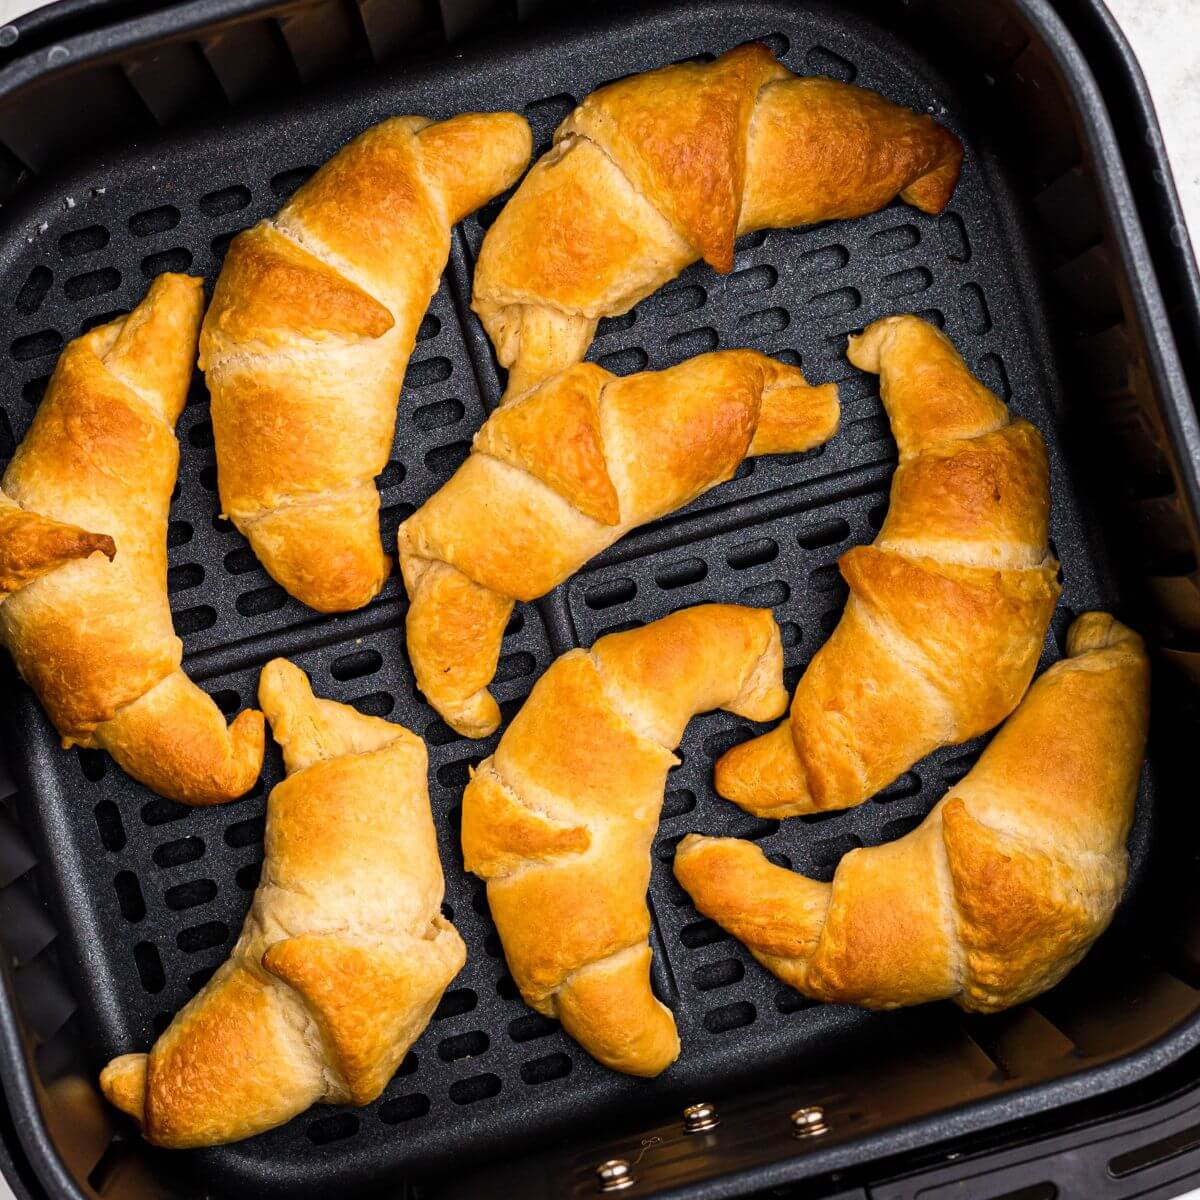 Golden crescent rolls in the air fryer basket after being cooked.